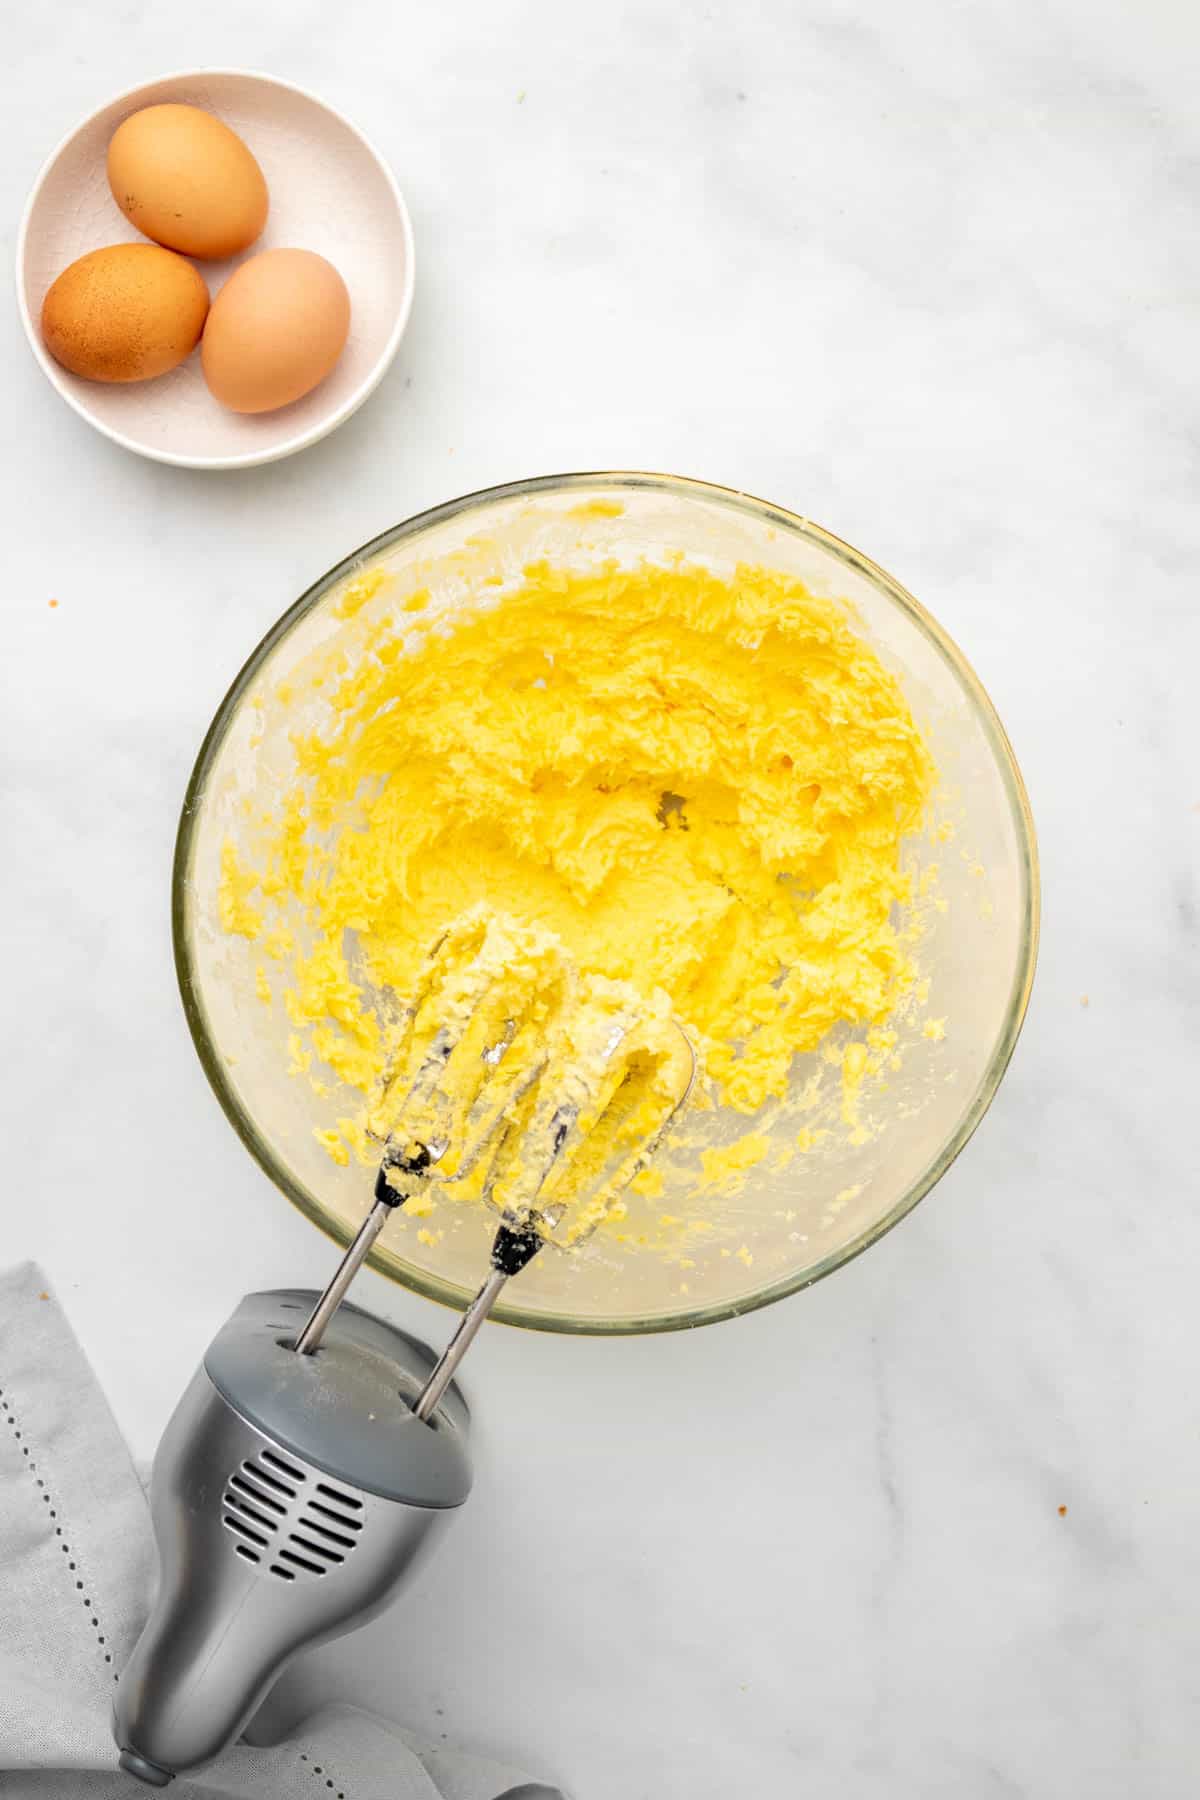 Pound cake batter mixed with hand beaters in a glass bowl next to a ramekin with 3 eggs